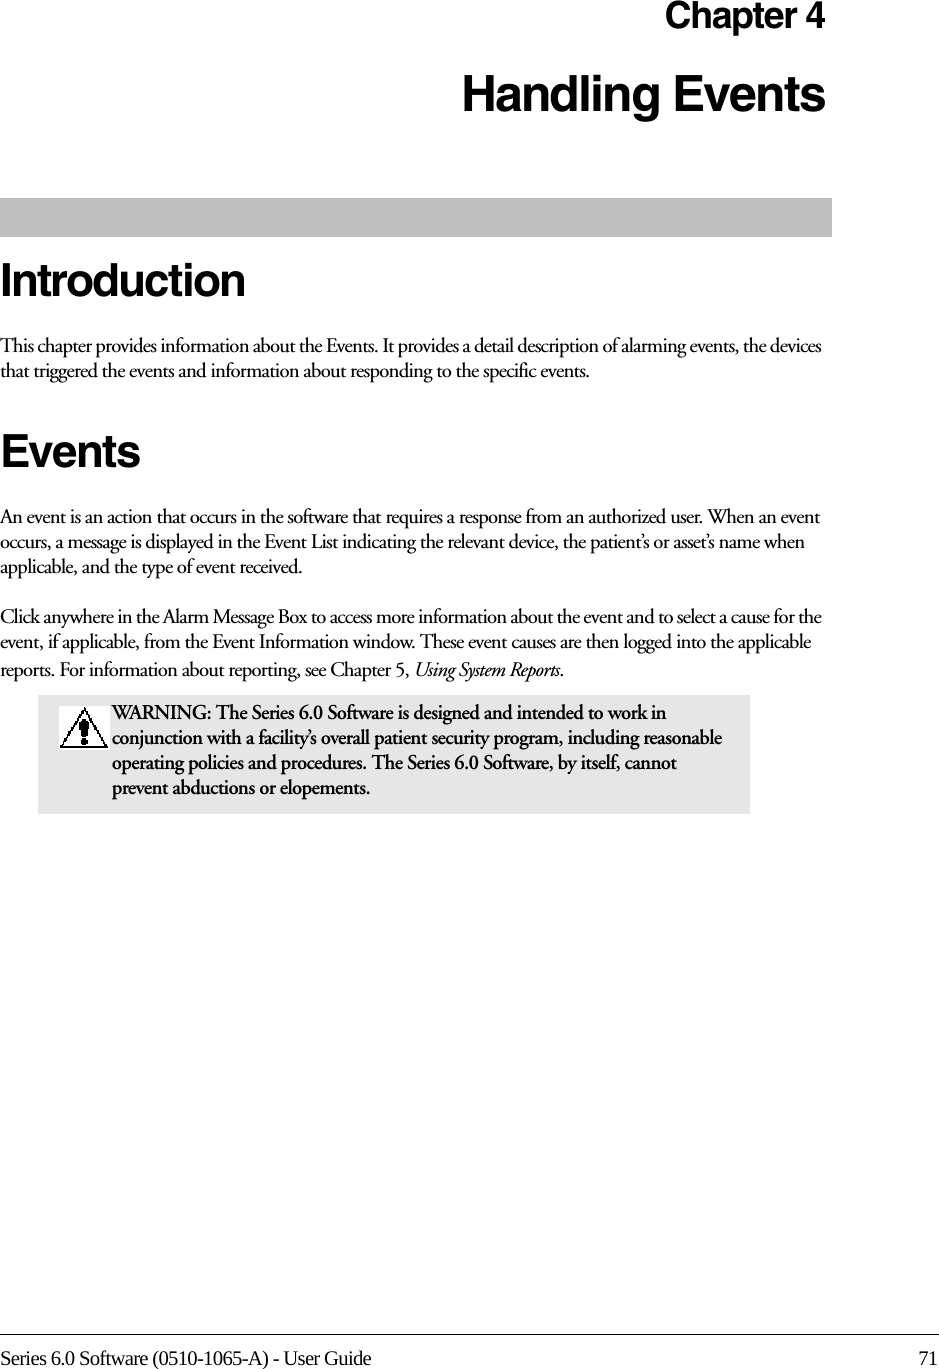 Series 6.0 Software (0510-1065-A) - User Guide 71Chapter 4Handling EventsIntroductionThis chapter provides information about the Events. It provides a detail description of alarming events, the devices that triggered the events and information about responding to the specific events. Events An event is an action that occurs in the software that requires a response from an authorized user. When an event occurs, a message is displayed in the Event List indicating the relevant device, the patient’s or asset’s name when applicable, and the type of event received. Click anywhere in the Alarm Message Box to access more information about the event and to select a cause for the event, if applicable, from the Event Information window. These event causes are then logged into the applicable reports. For information about reporting, see Chapter 5, Using System Reports.WARNING: The Series 6.0 Software is designed and intended to work in conjunction with a facility’s overall patient security program, including reasonable operating policies and procedures. The Series 6.0 Software, by itself, cannot prevent abductions or elopements. 